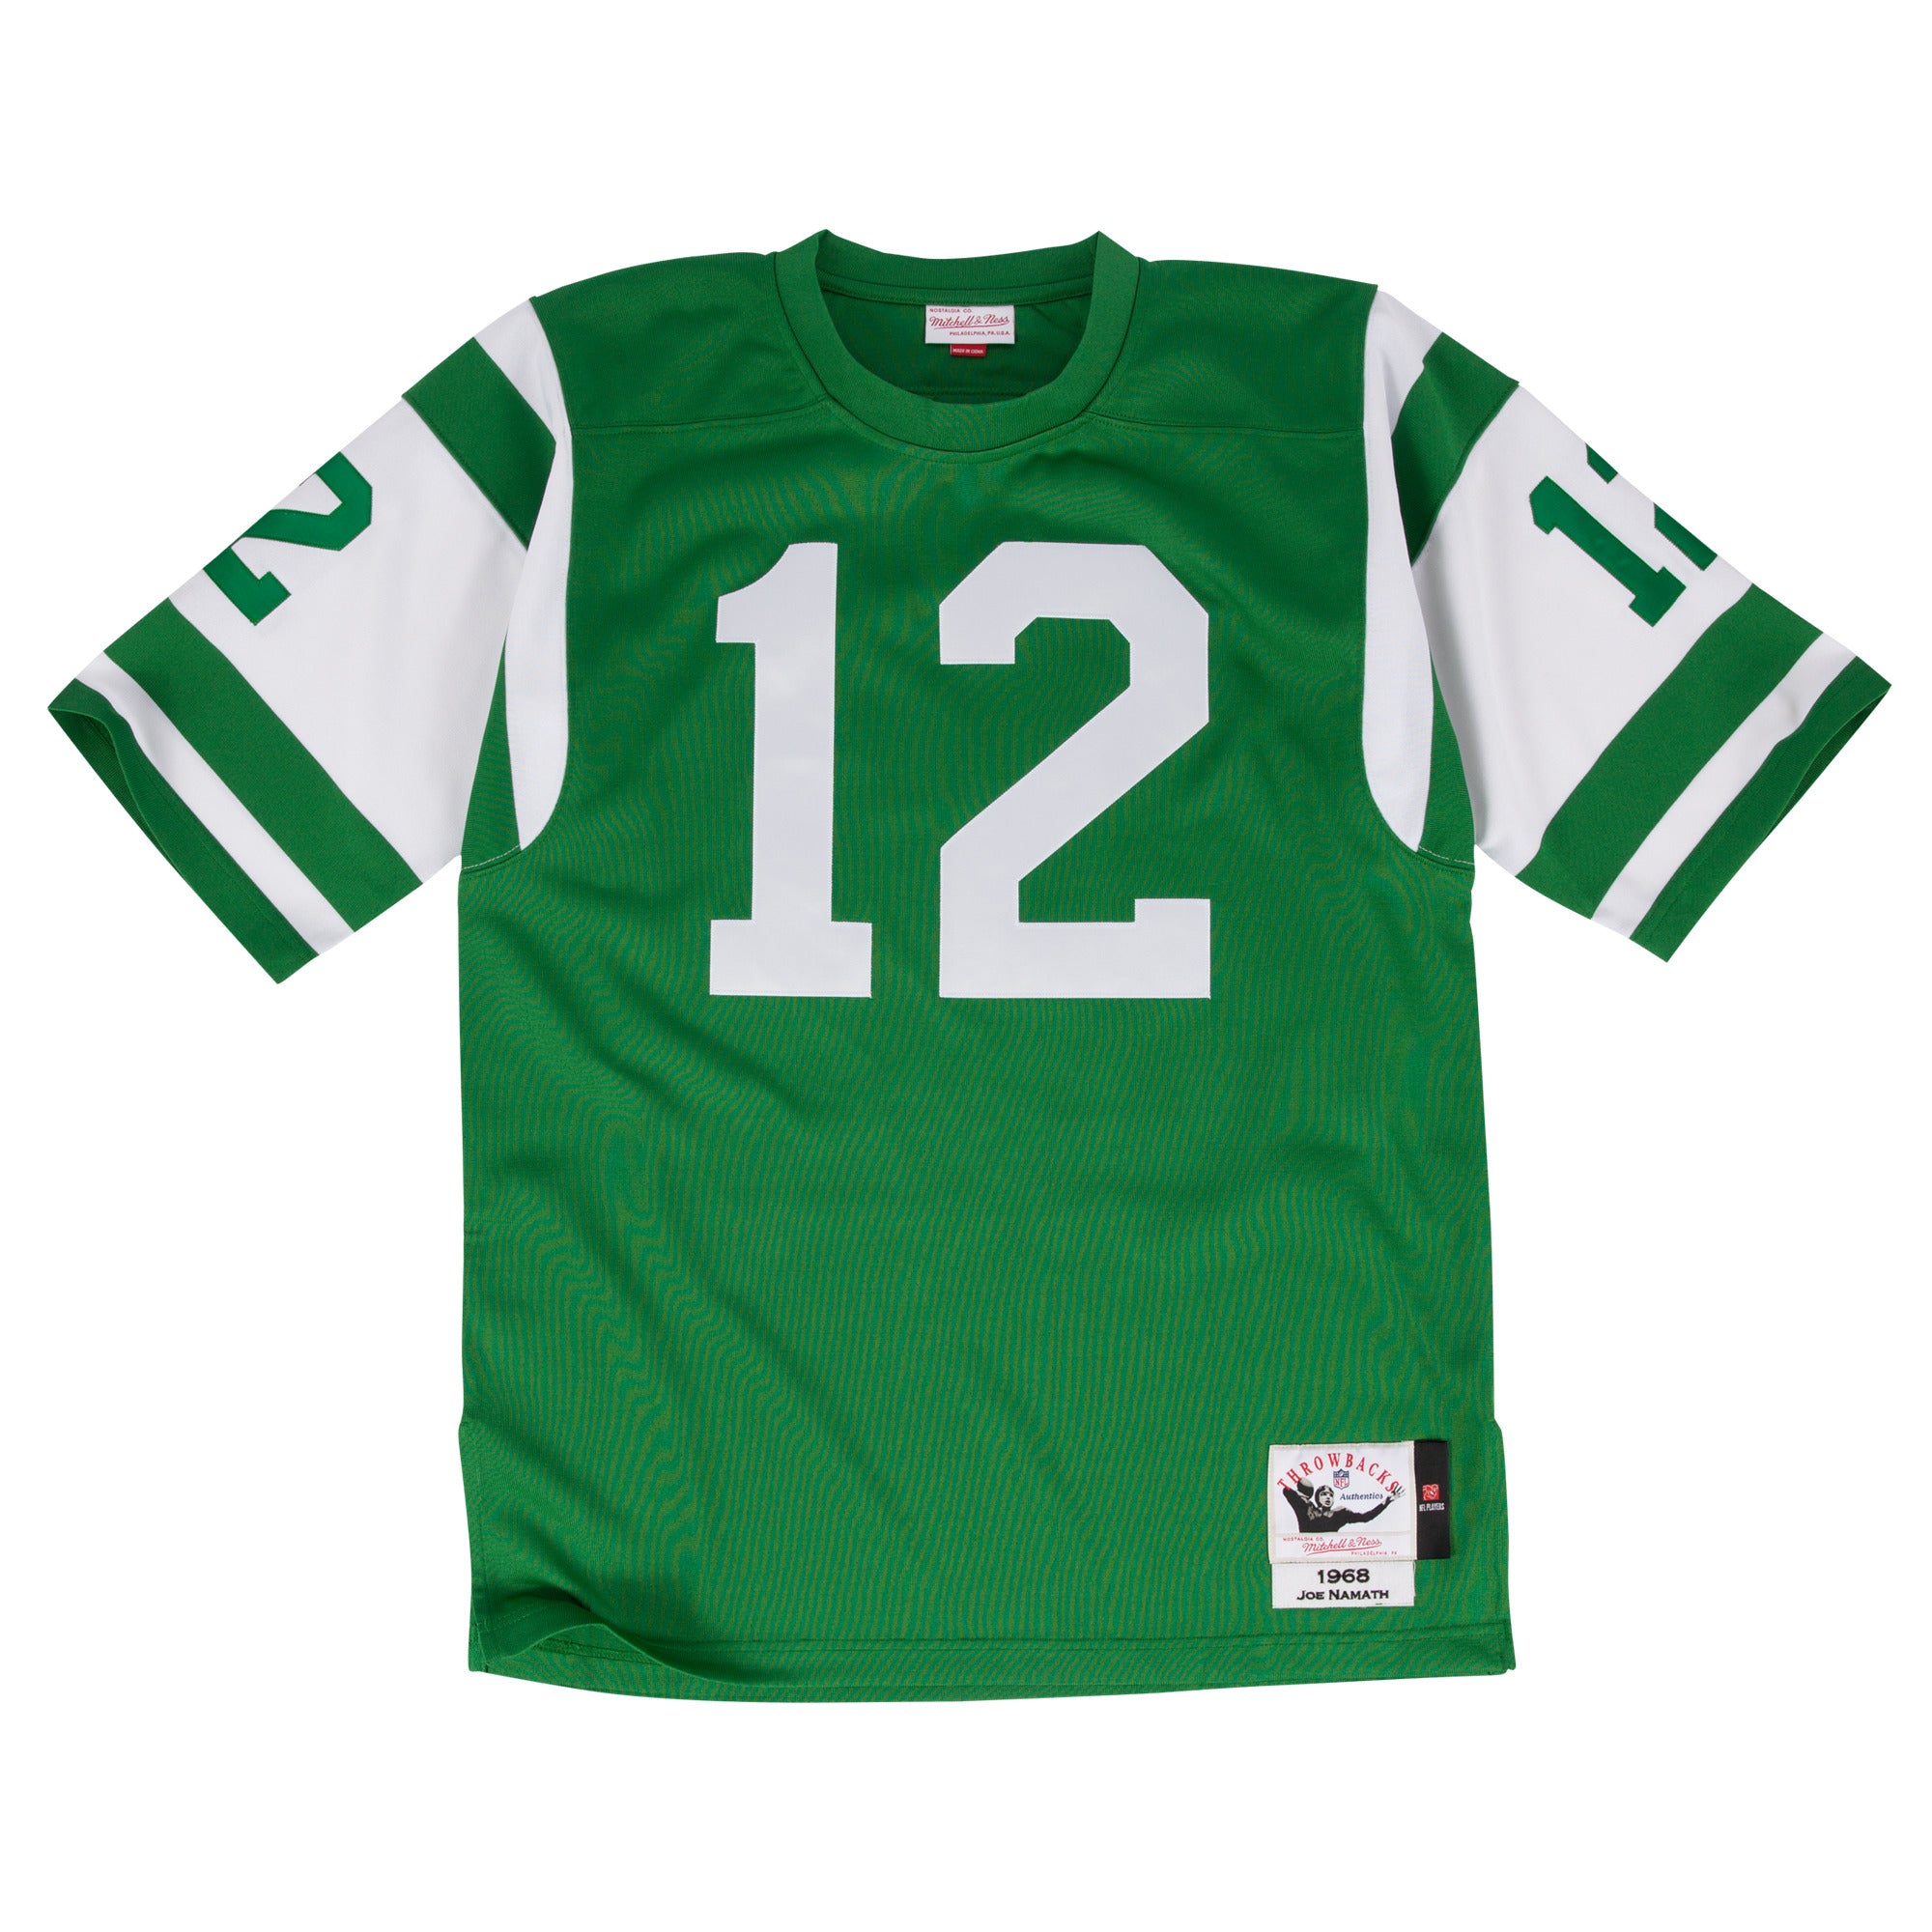 where can i buy an authentic nfl jersey